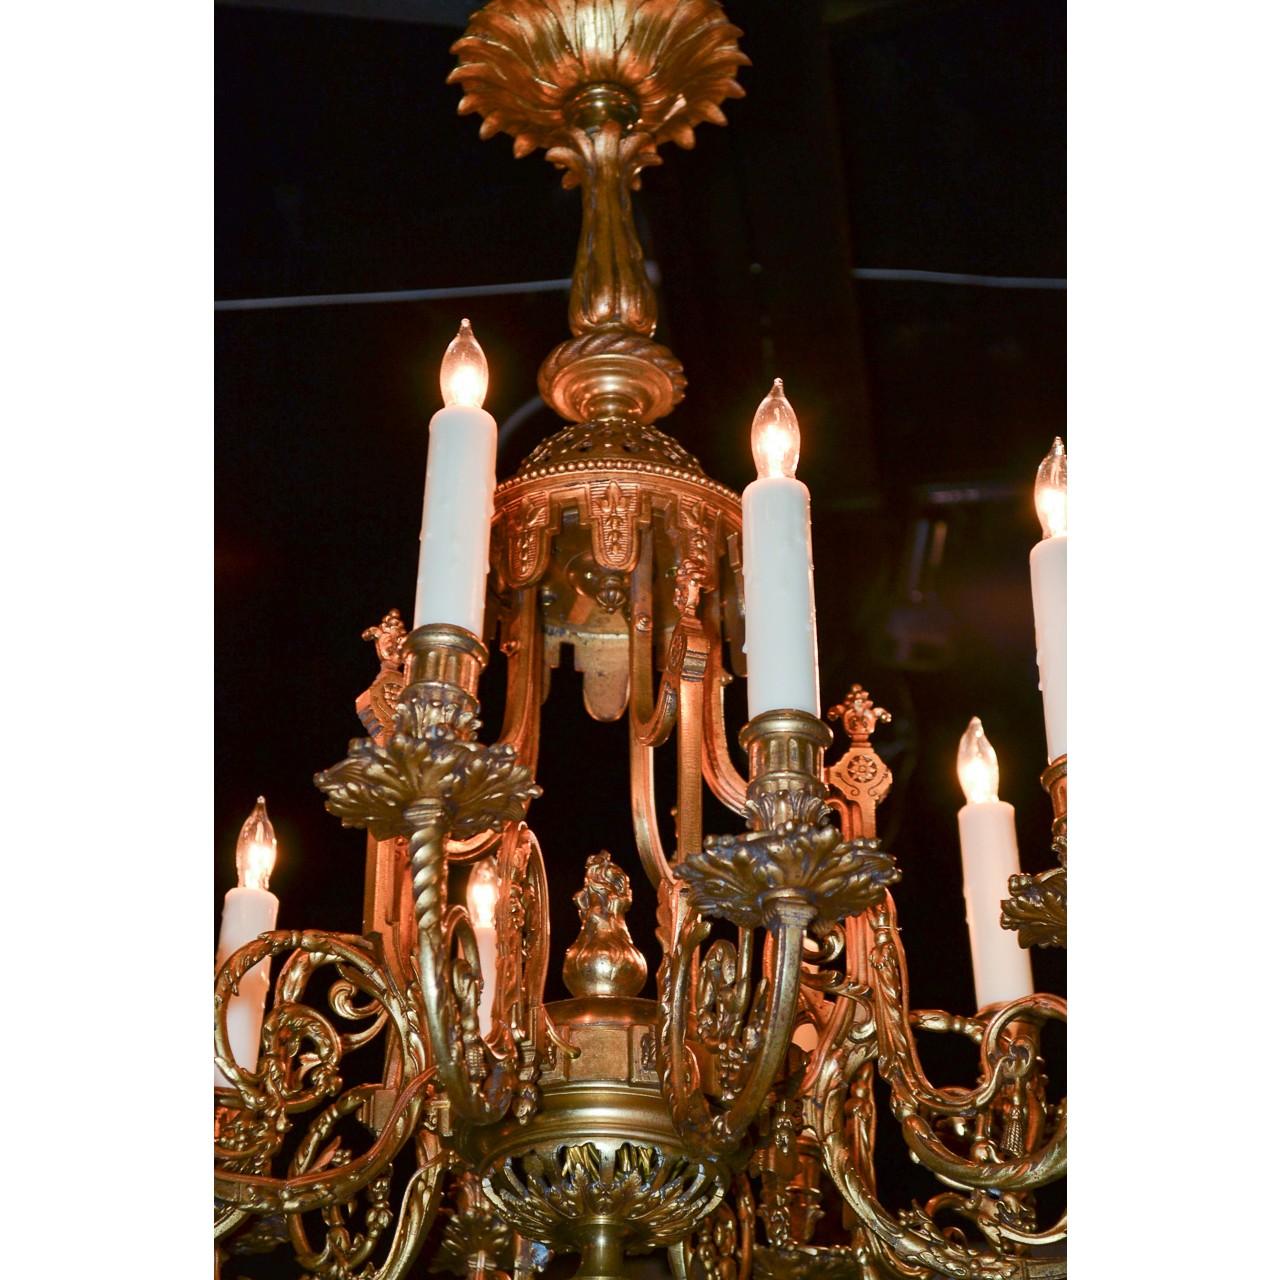 Exceptional 19th century French gilt bronze chandelier. The flared leaf spray canopy atop a shaped stem, pierced crown, and flame finial. Mounted with ten elaborately scrolled arms having foliate motif bobeche and fluted candle cups. The base